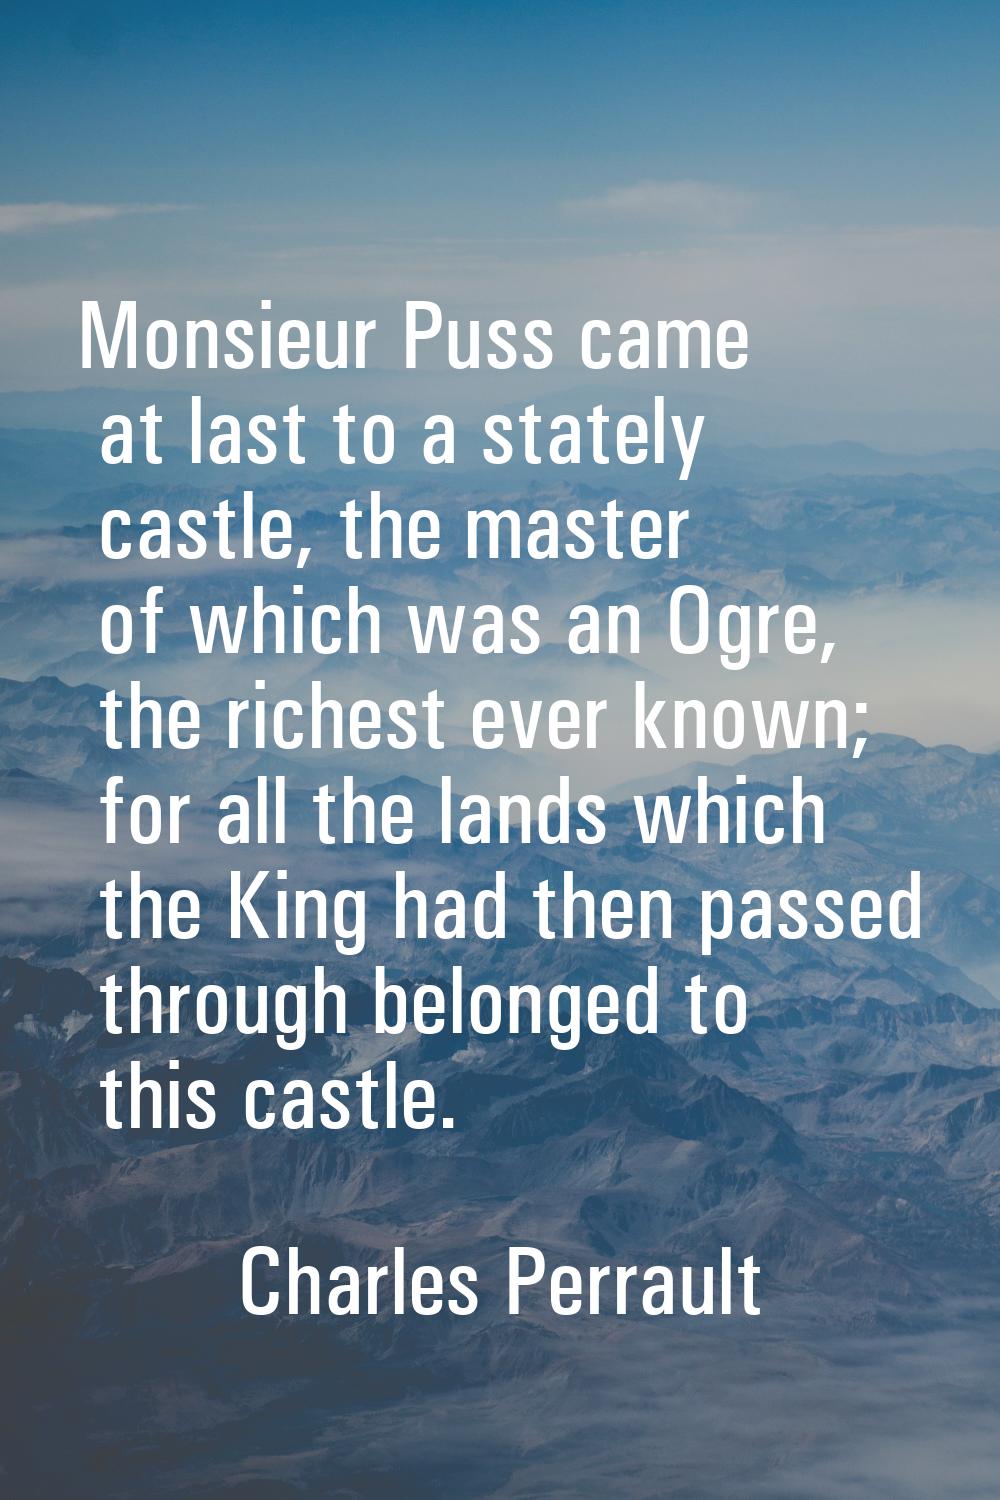 Monsieur Puss came at last to a stately castle, the master of which was an Ogre, the richest ever k